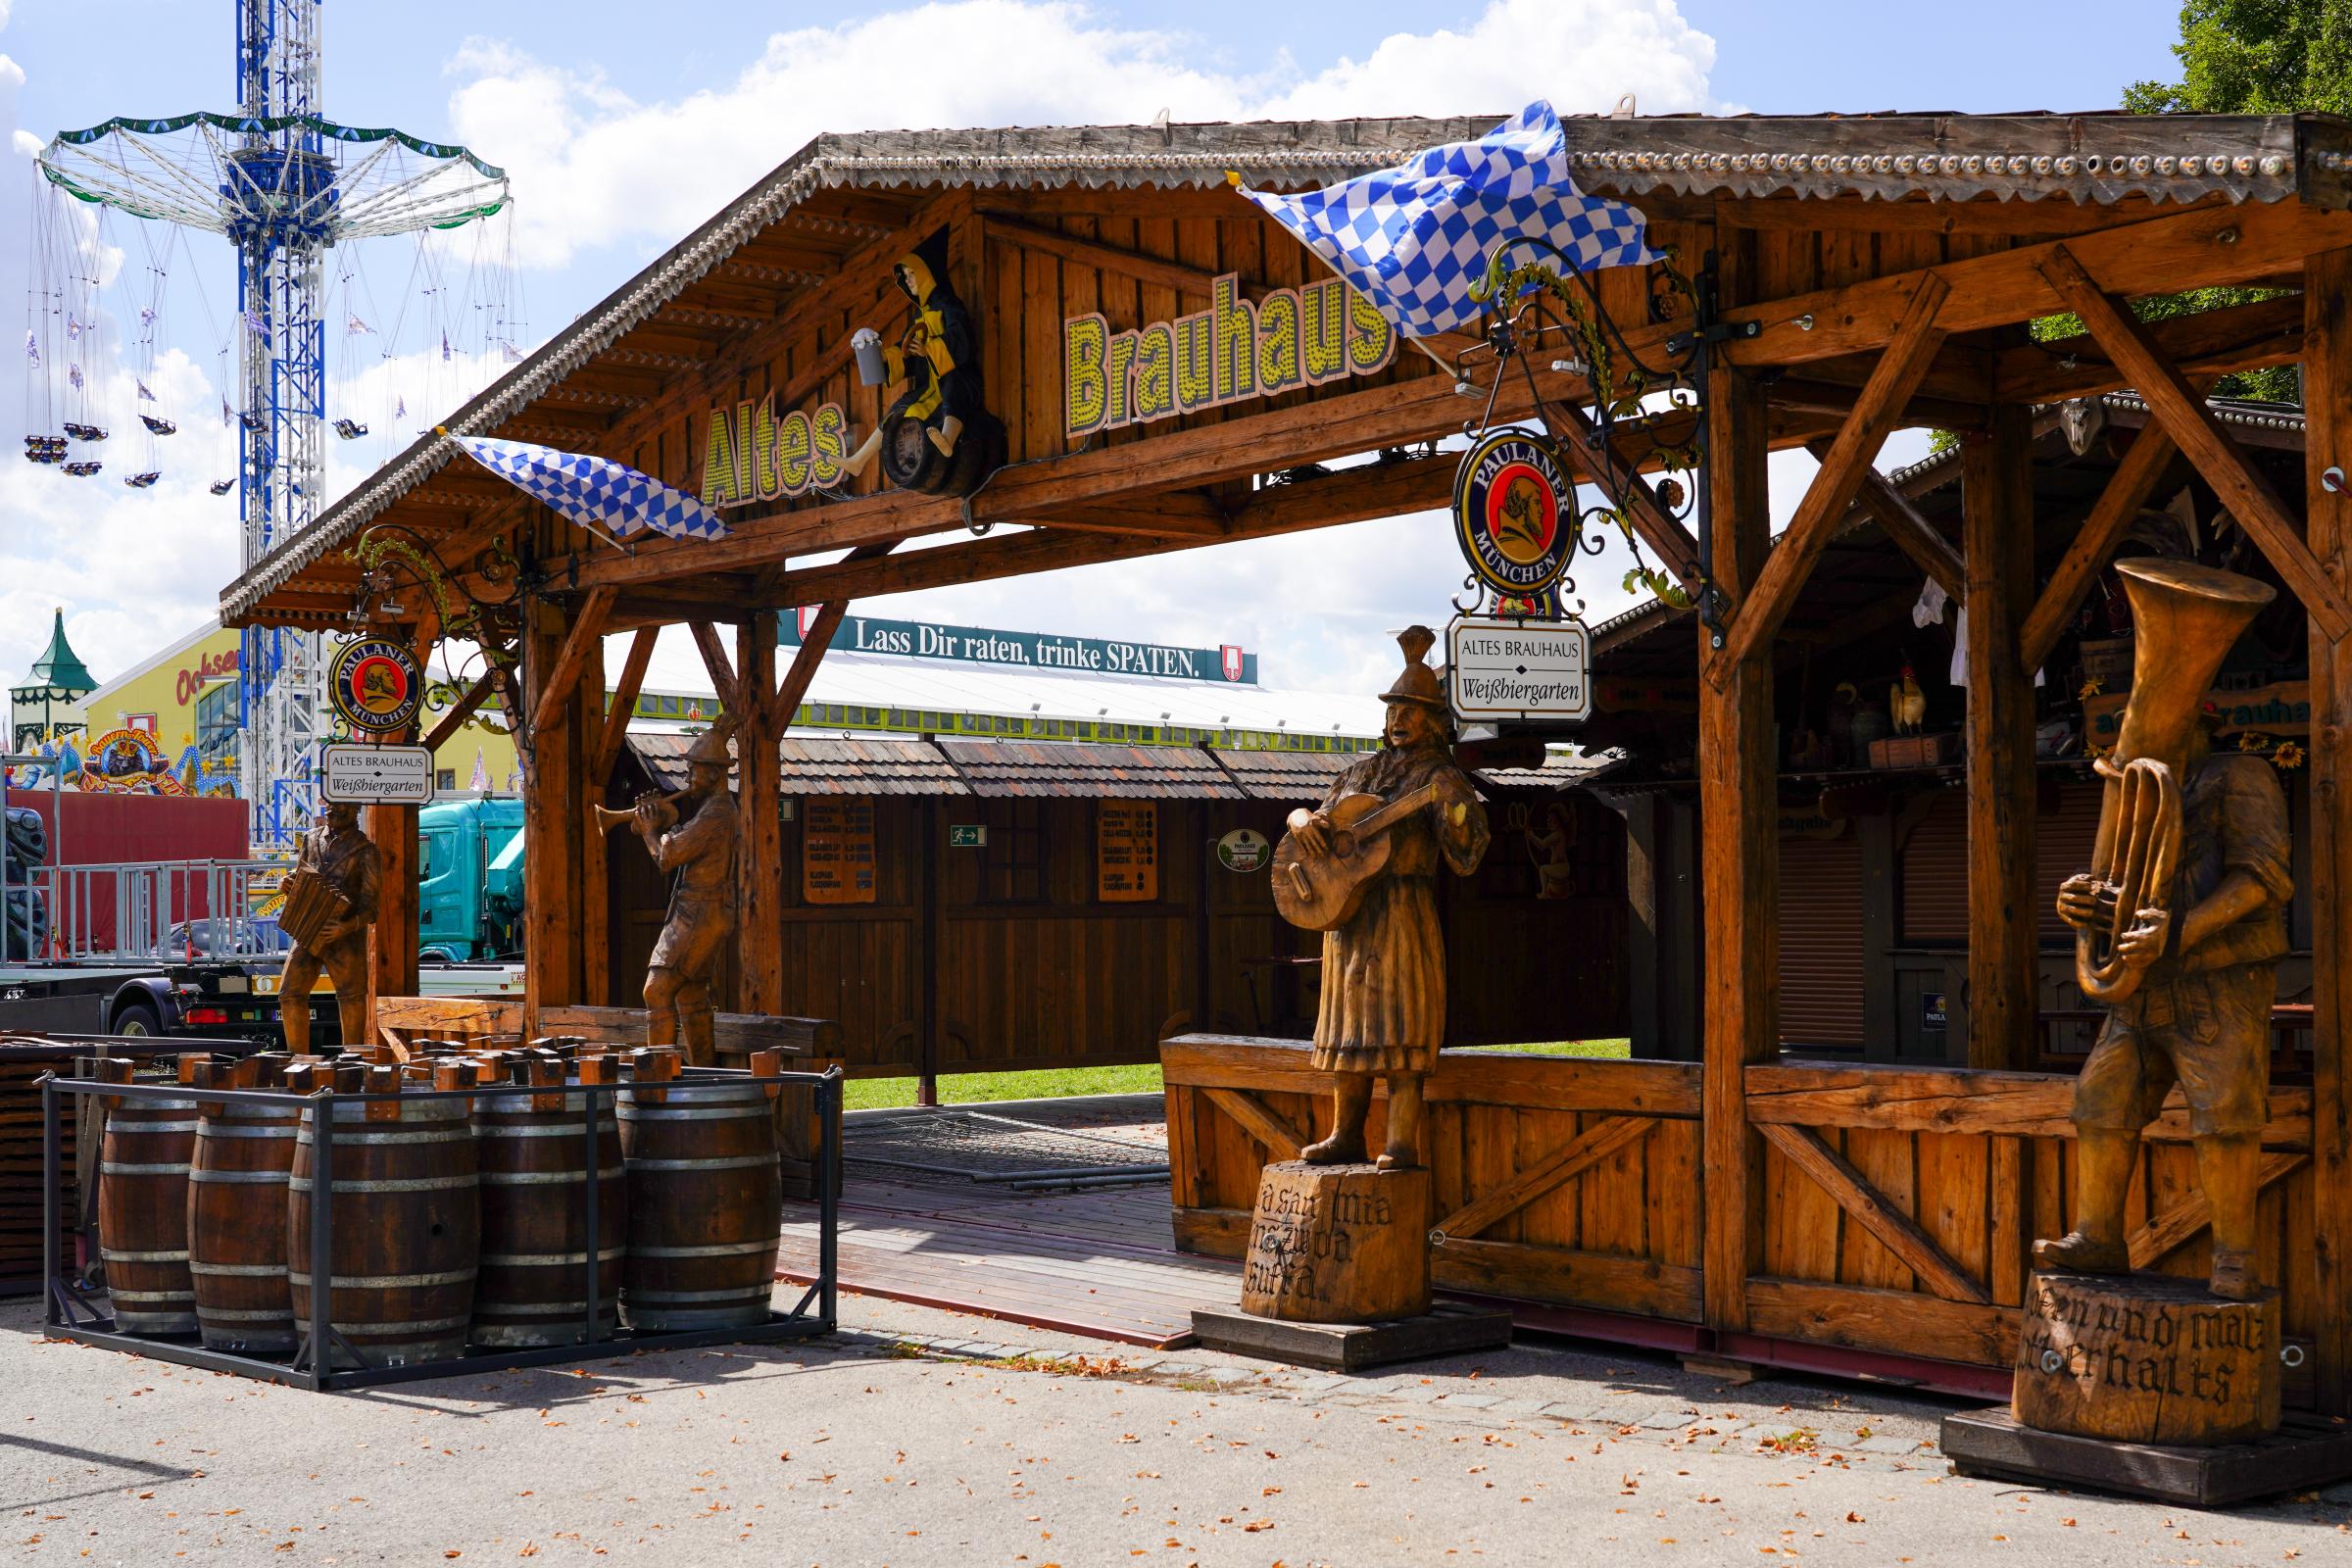 The Rides and Fairground Businesses for the world's largest Folk Festival, the Oktoberfest will be set up